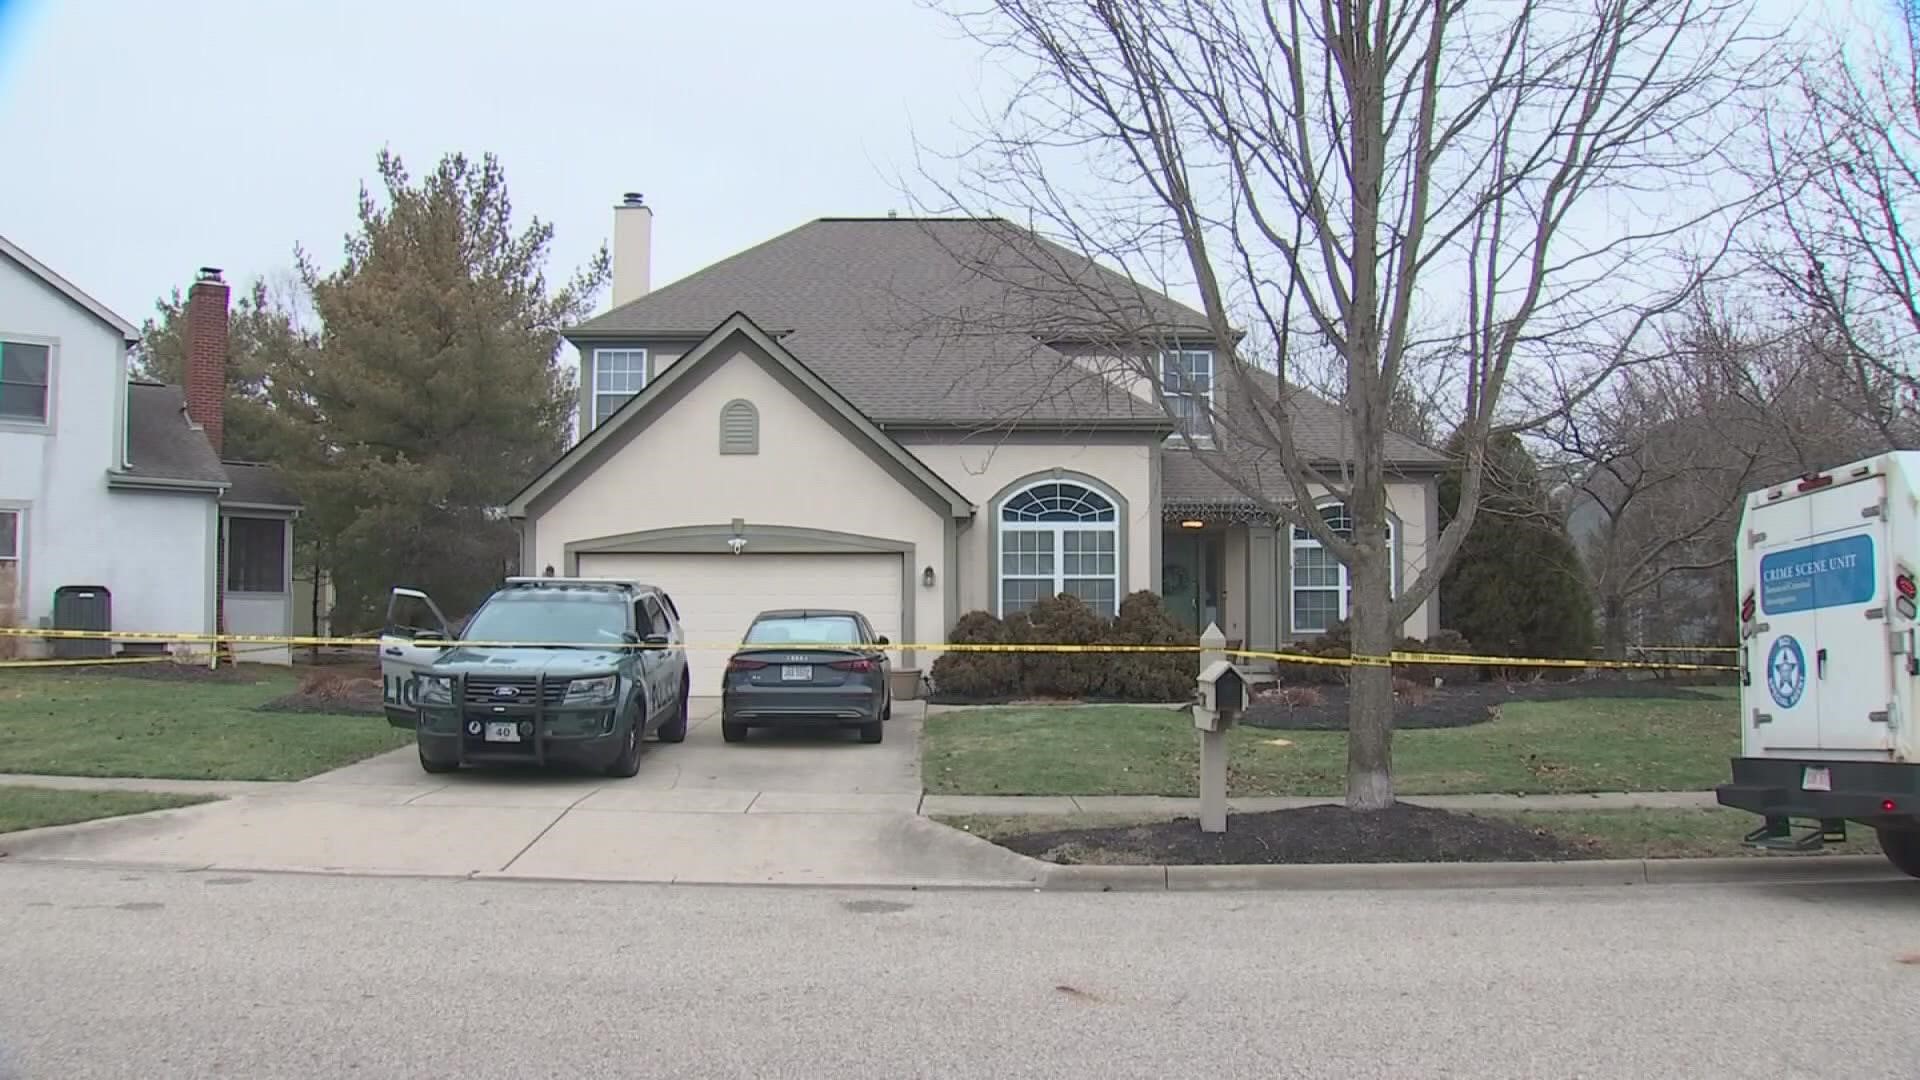 Police said two men and a woman were found inside the home and had been dead for several days.